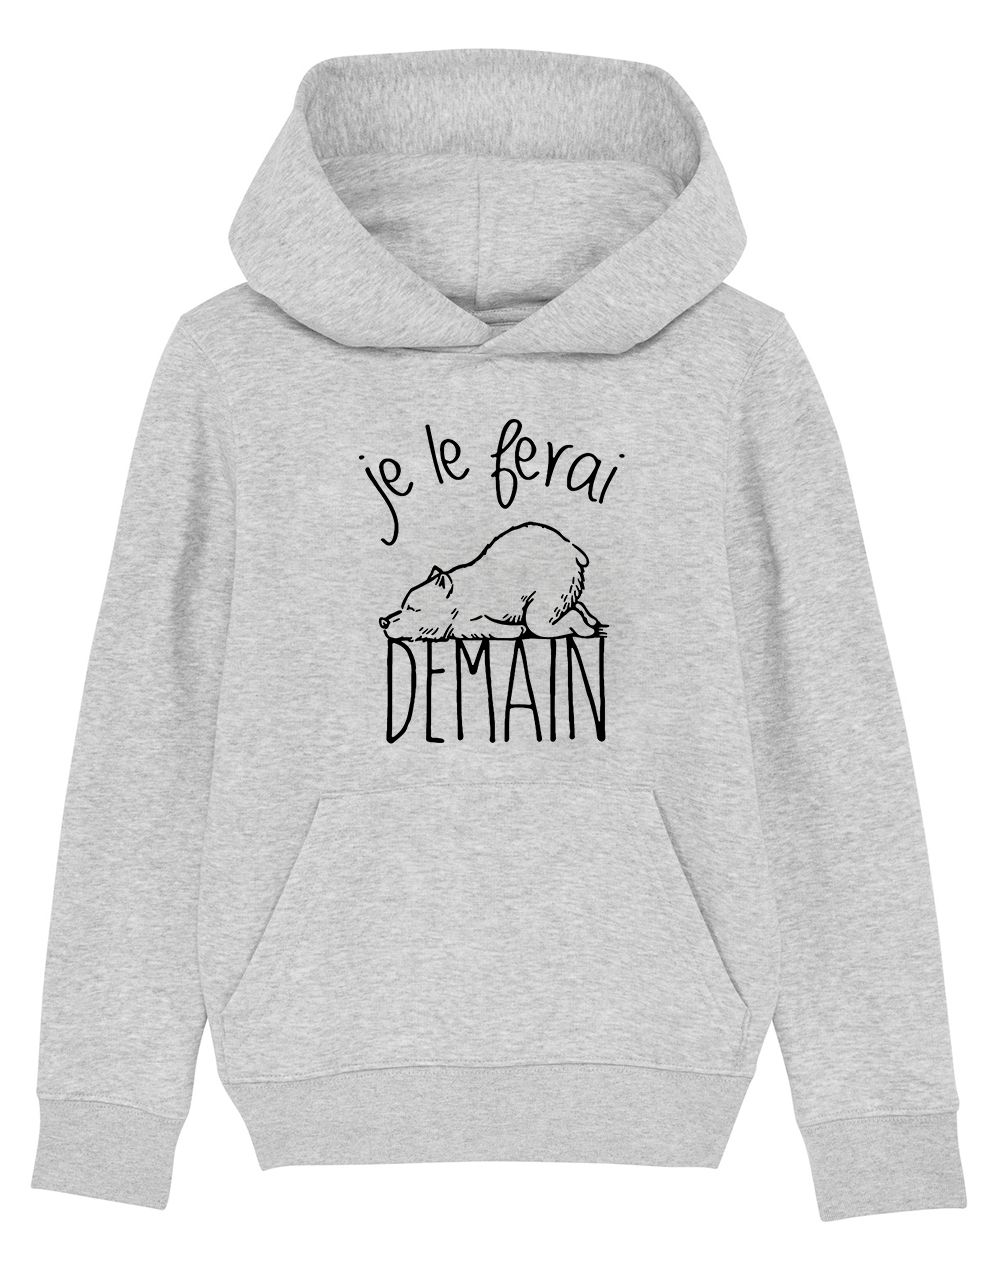 Sweat capuche "Demain ours"